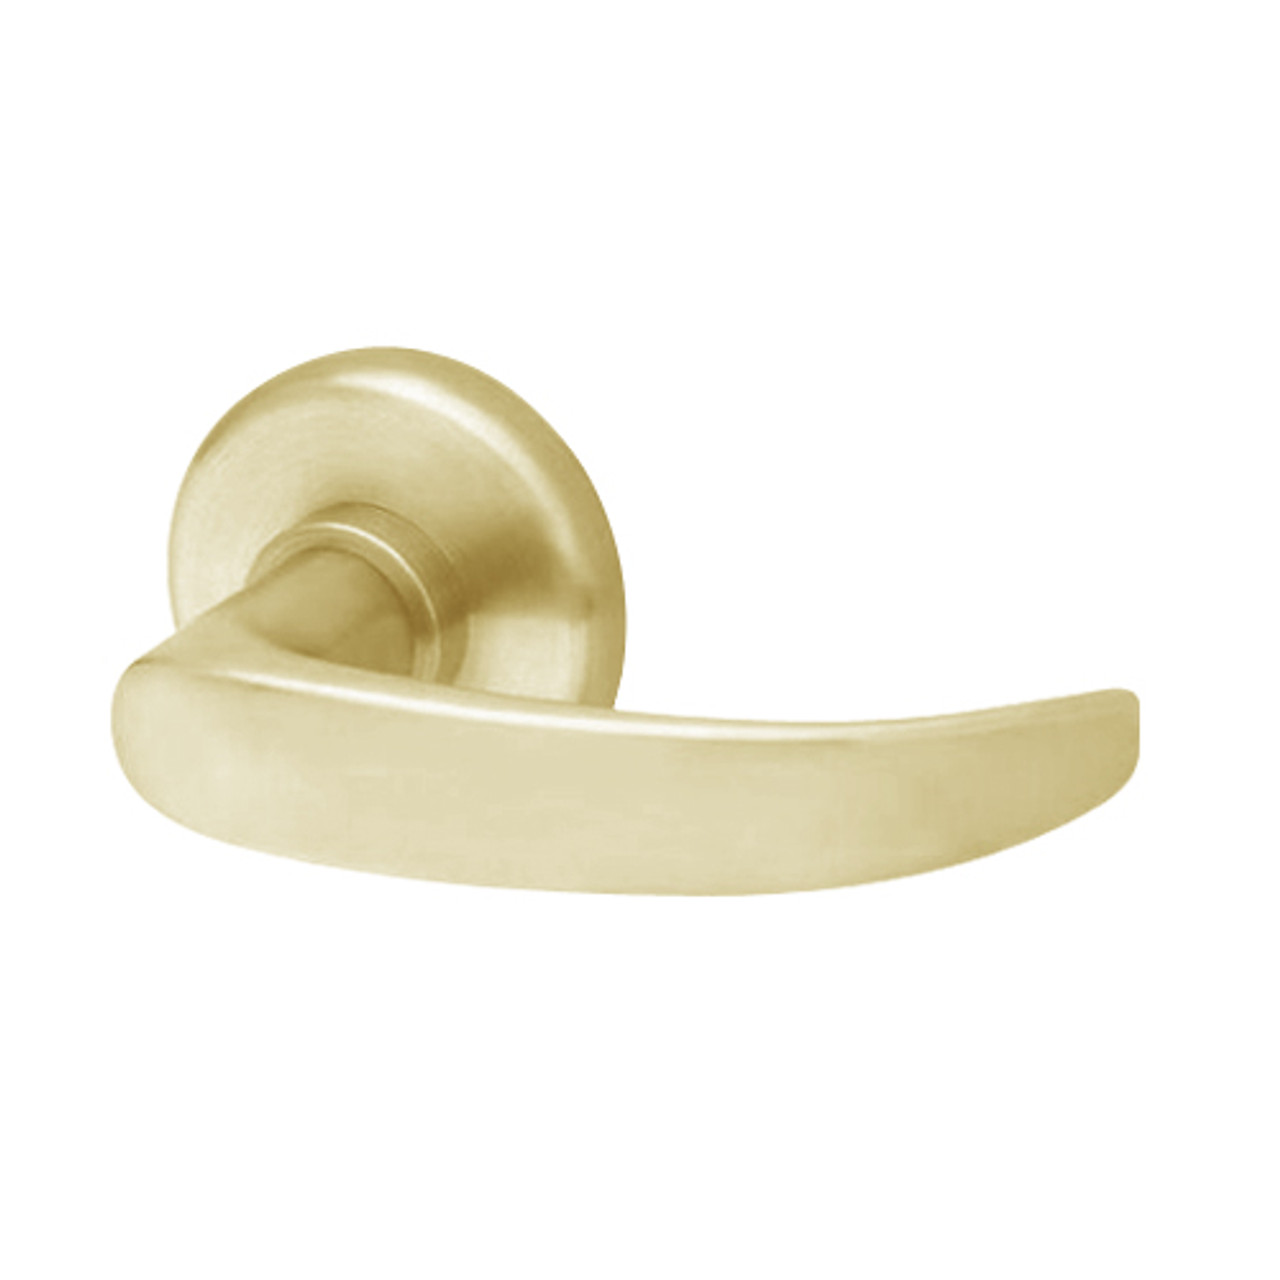 40HTKOS314S606 Best 40H Series Trim Kits Outside Lever w/ Emergency Plate with Curved Return Style in Satin Brass